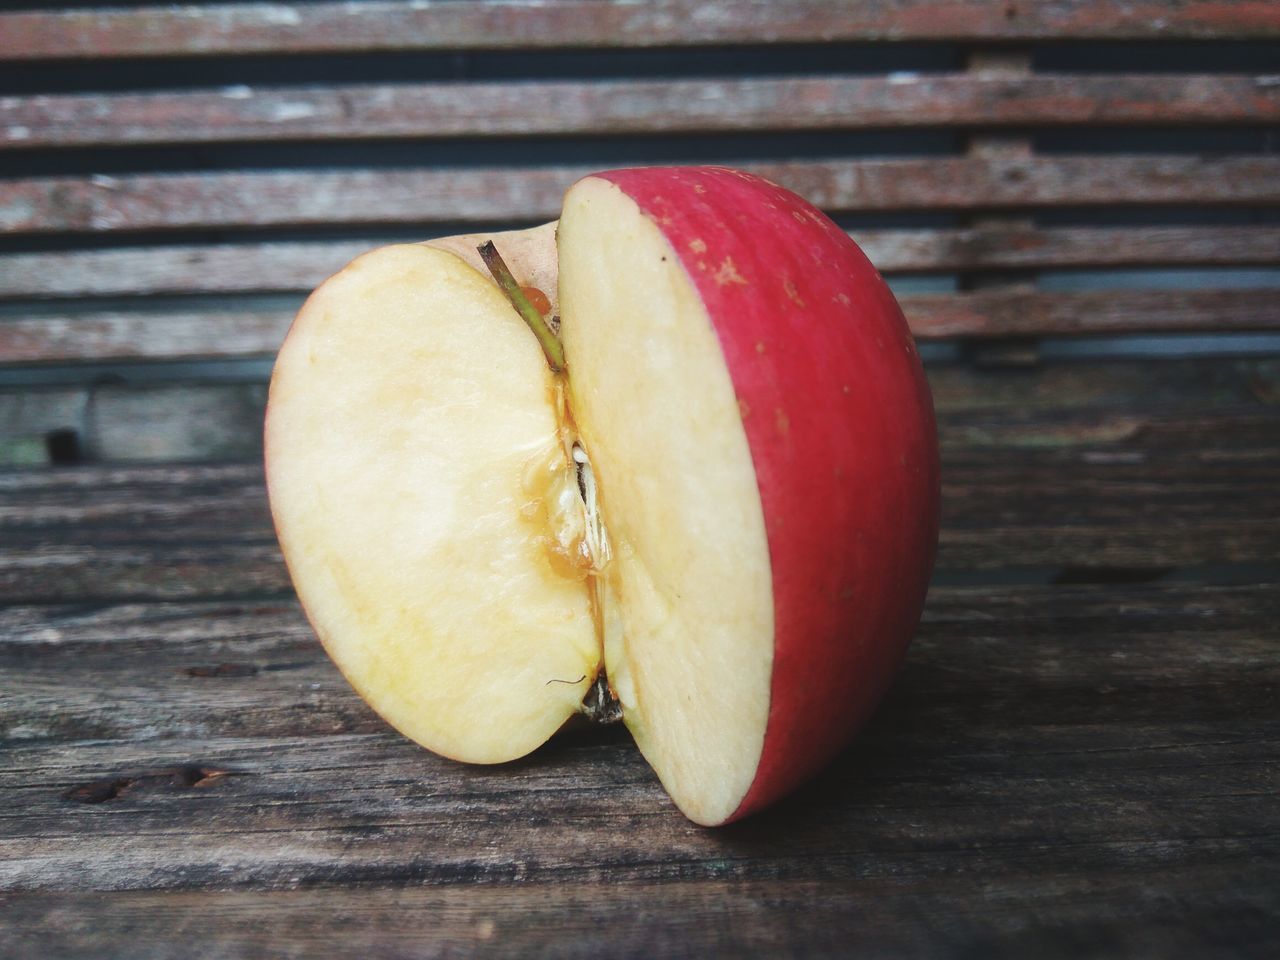 CLOSE-UP OF APPLE ON PLATE